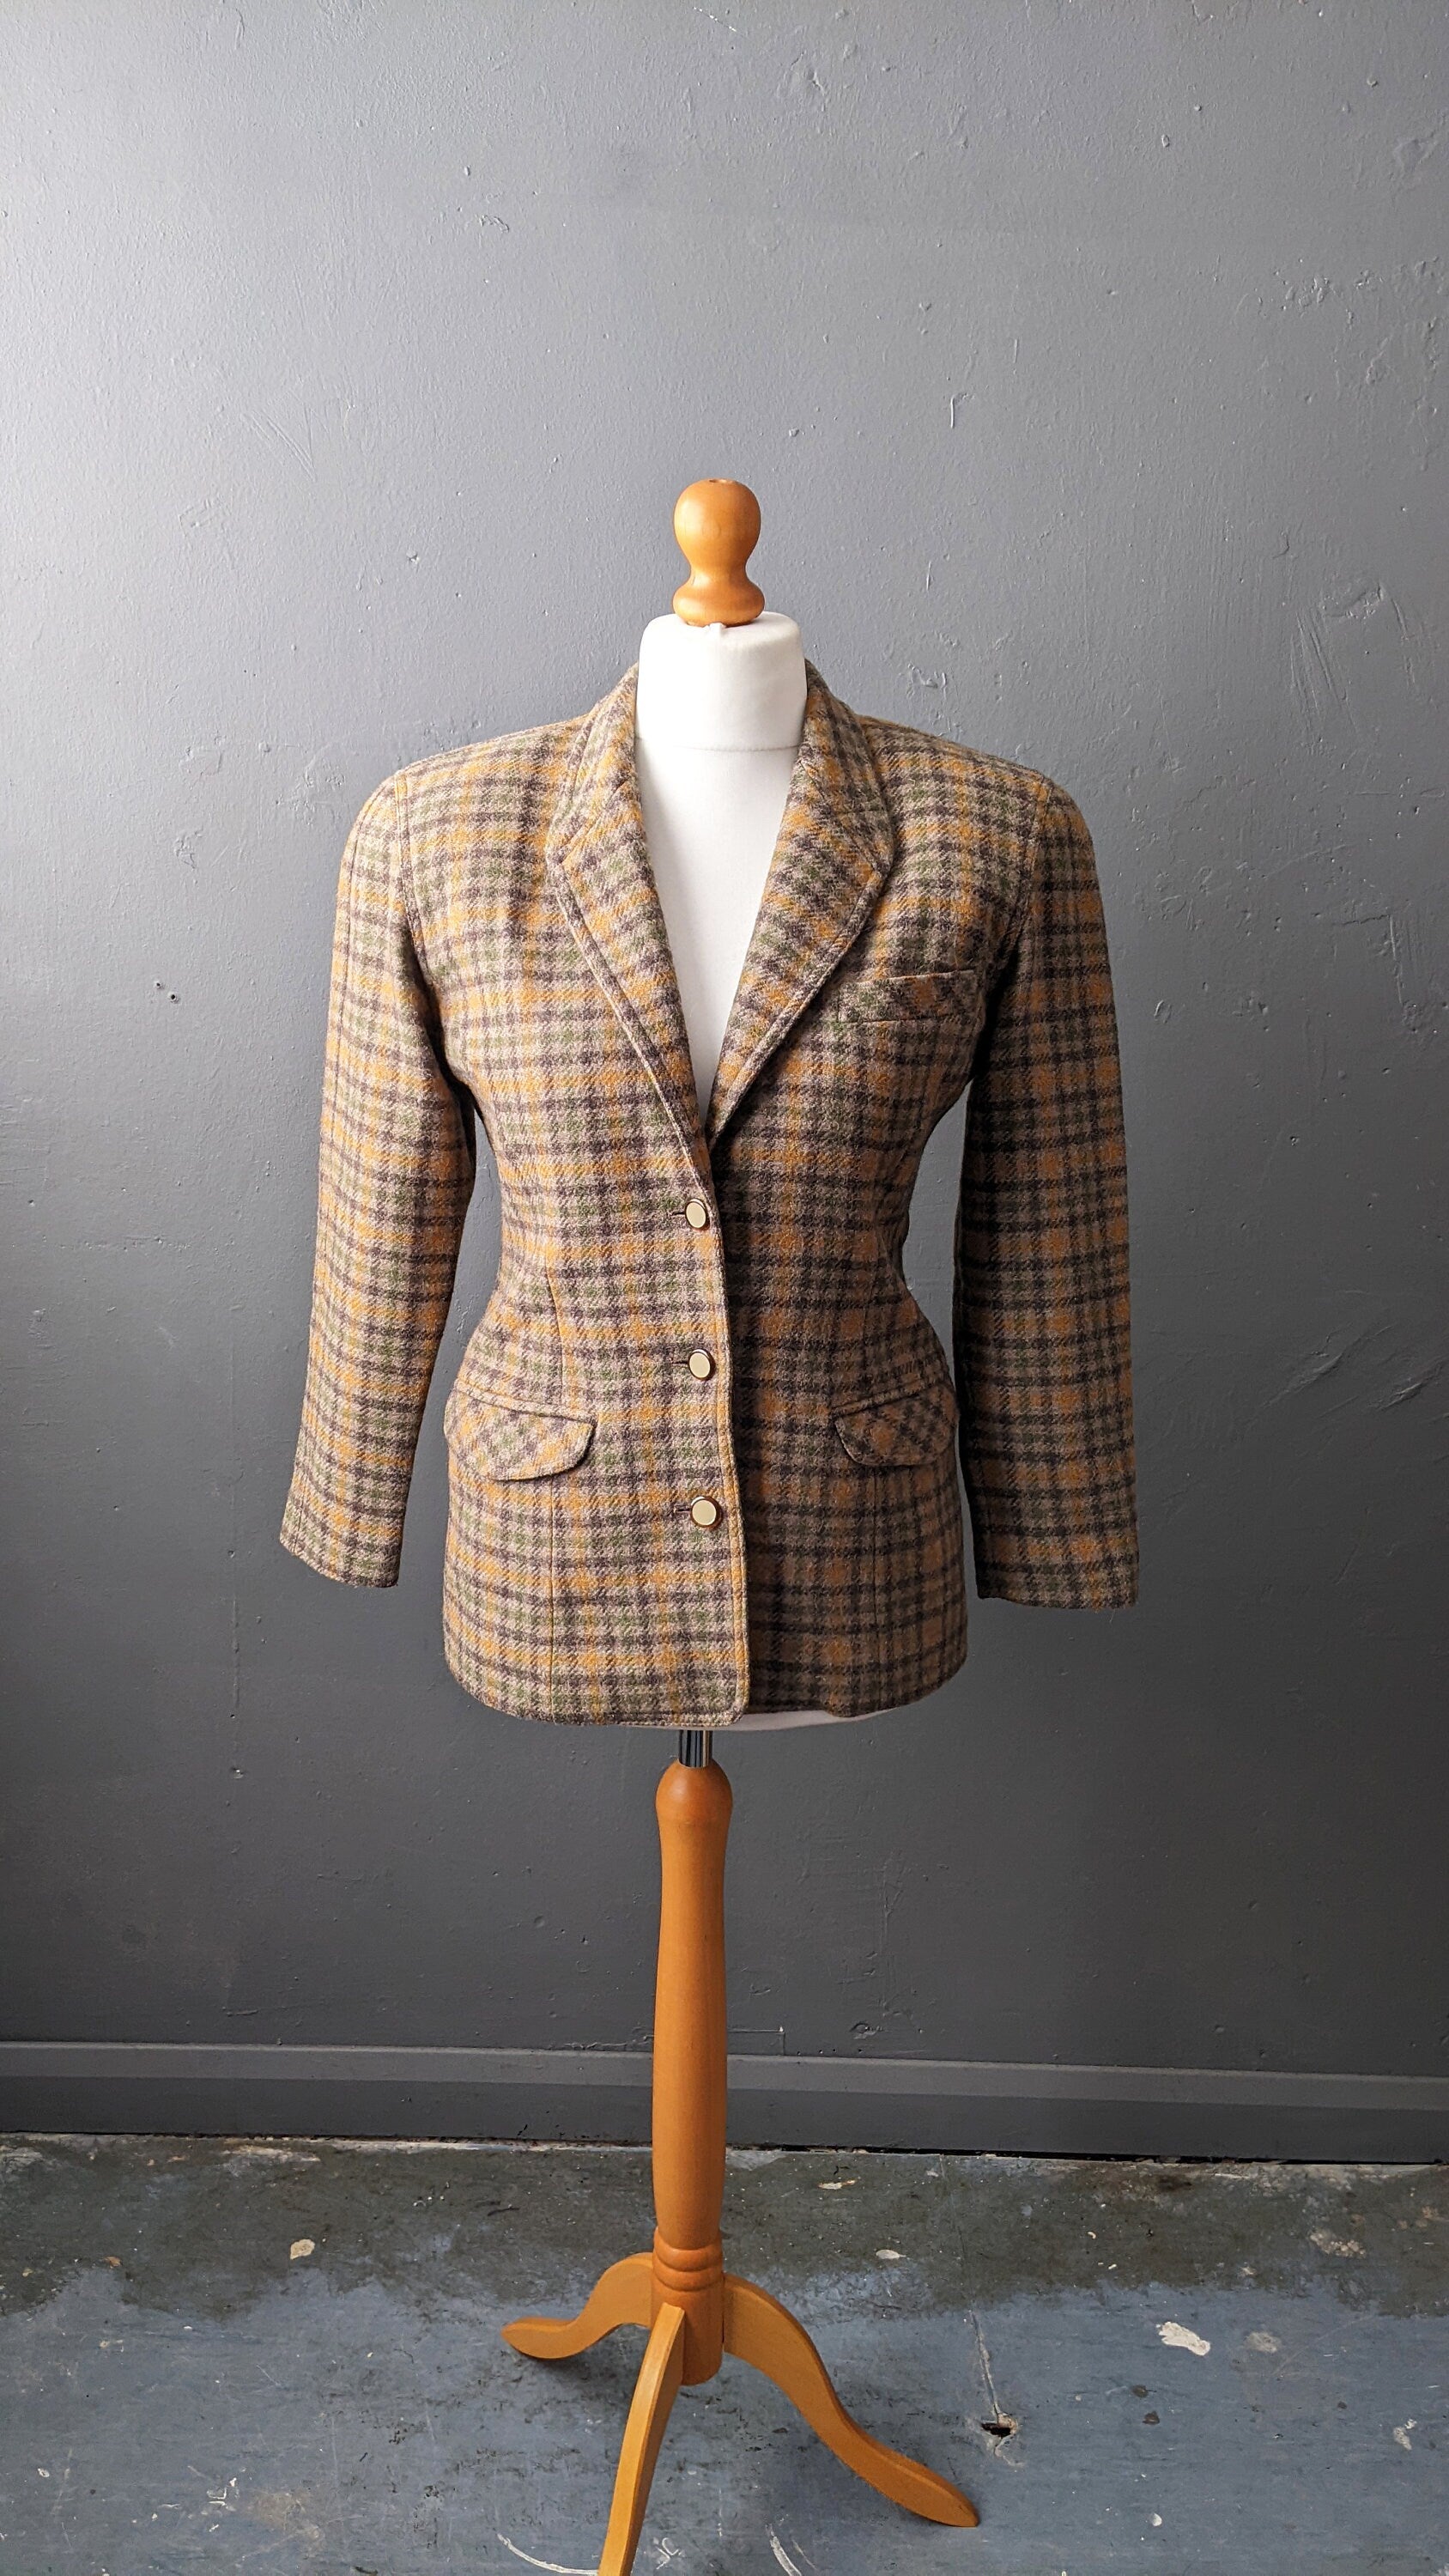 80s Country Check Wool Jacket, Fitted Smart Blazer, Size Small